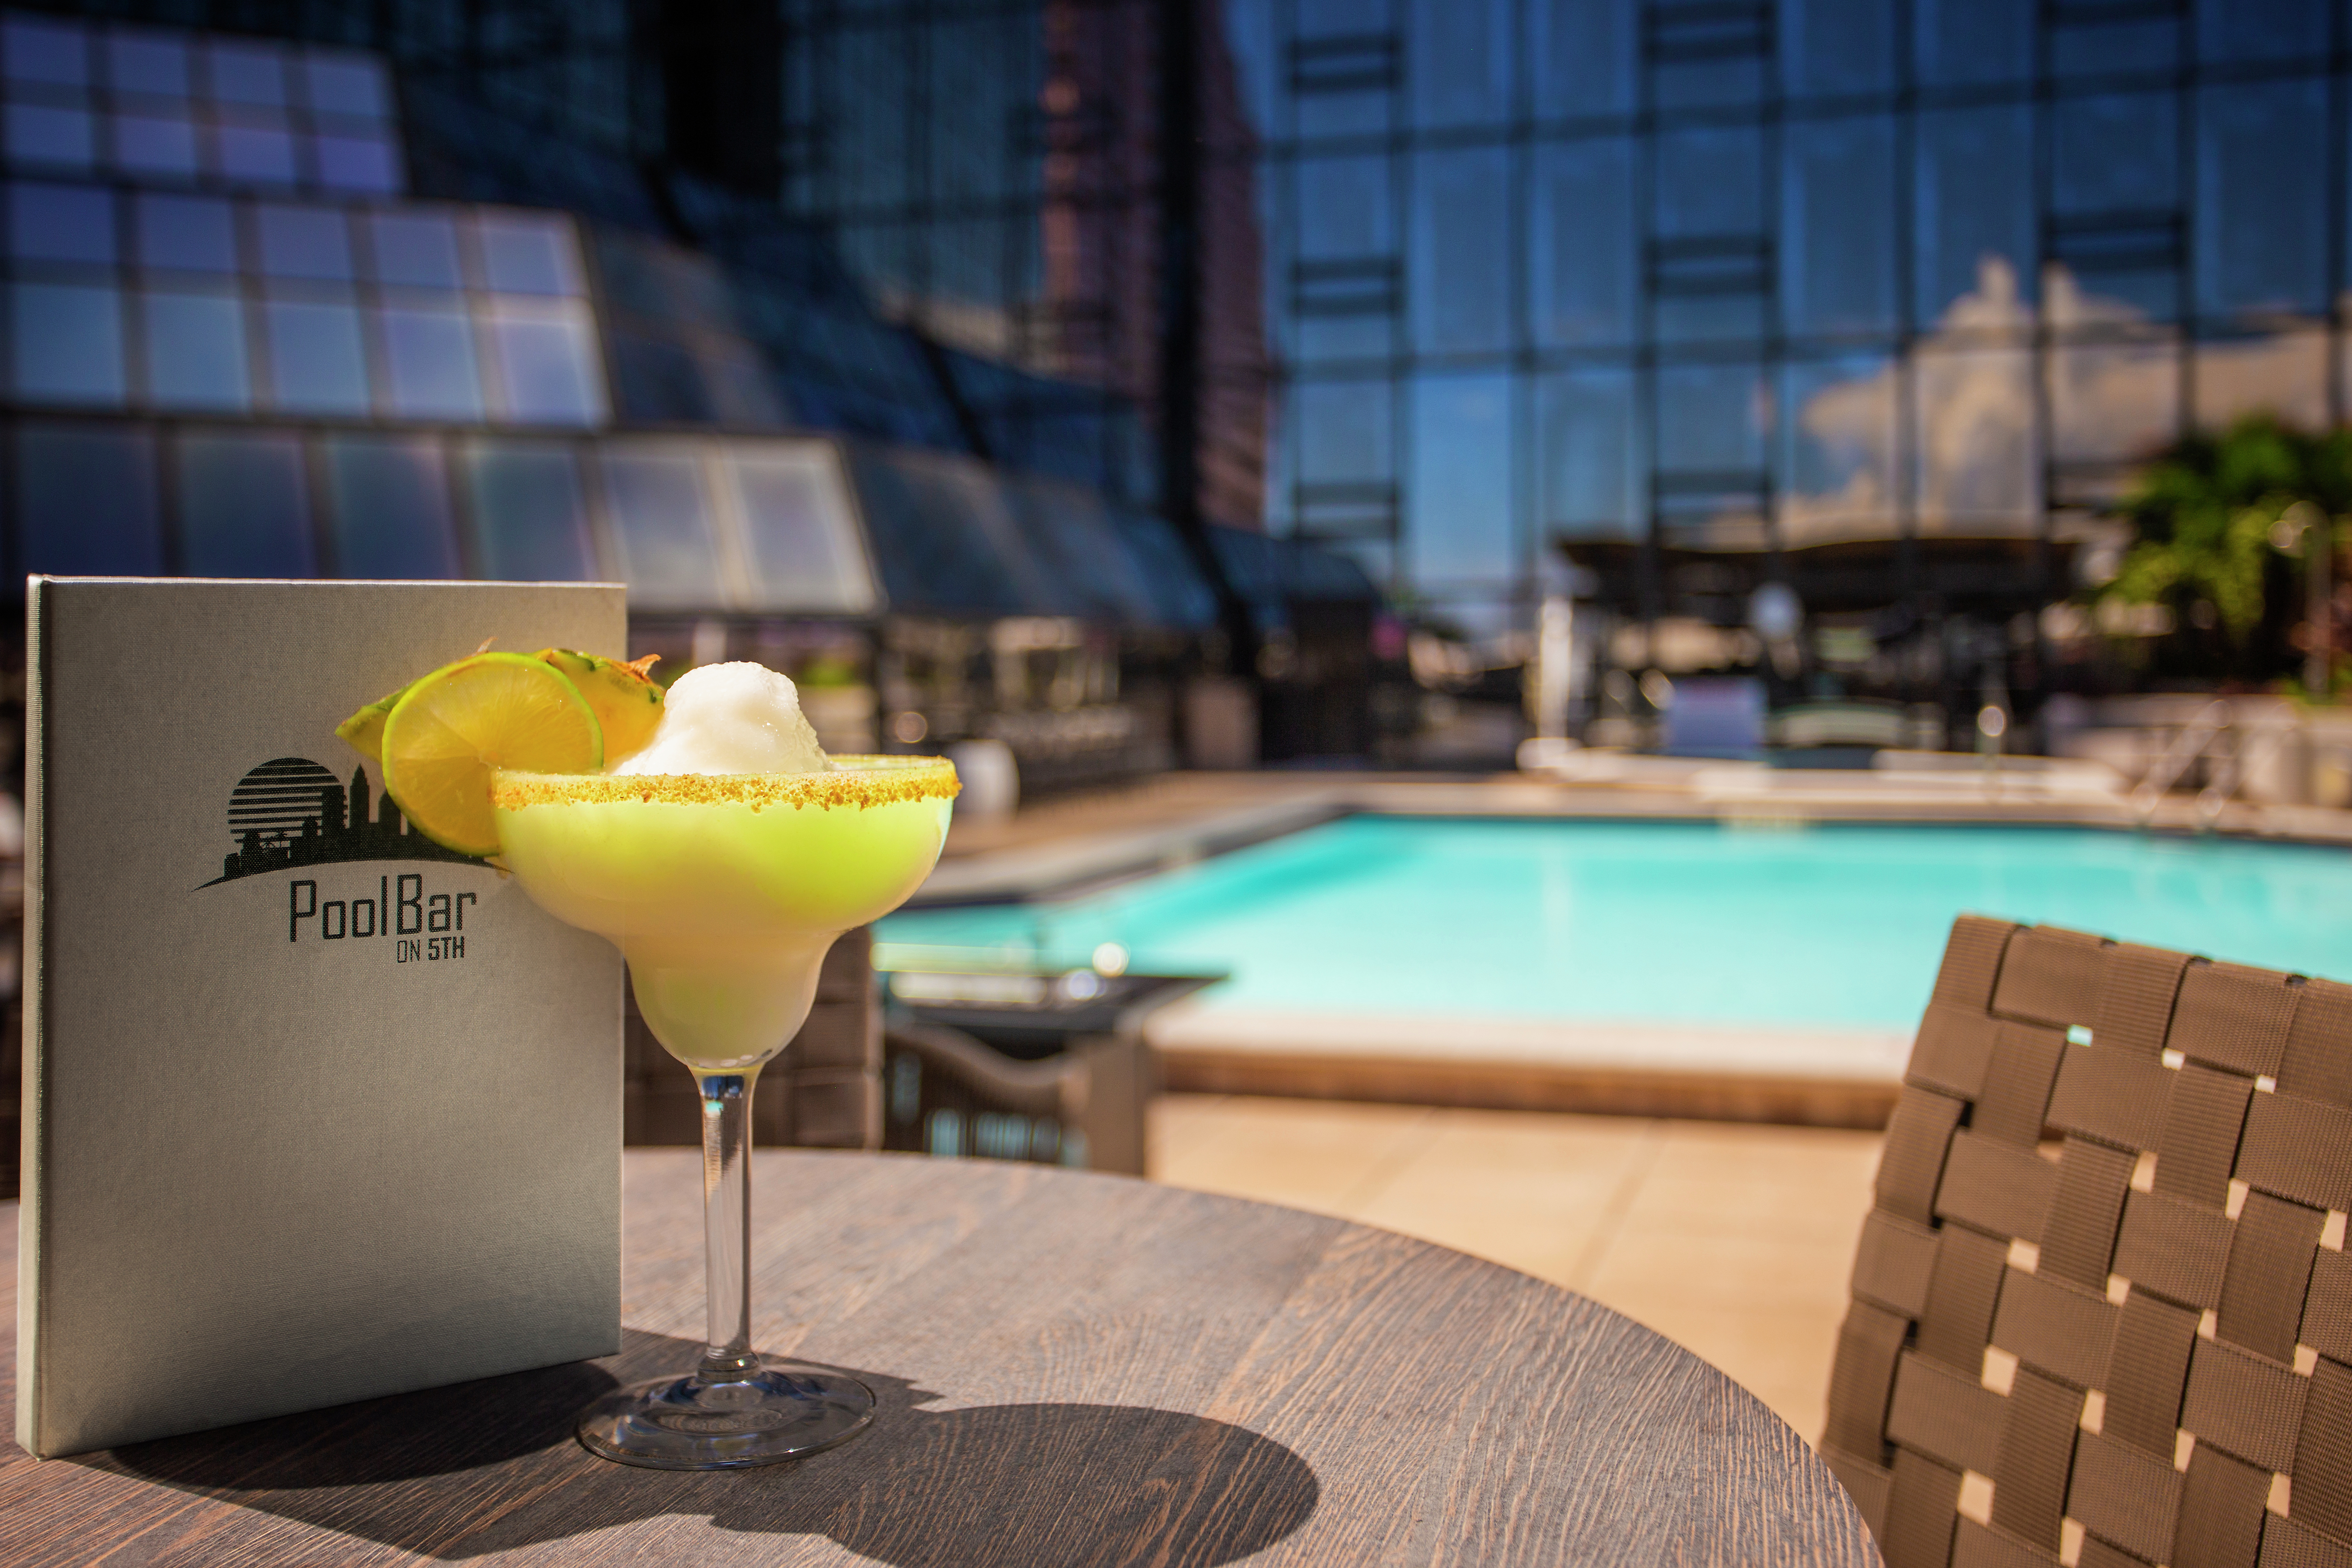 A Cocktail on a Table by the Pool